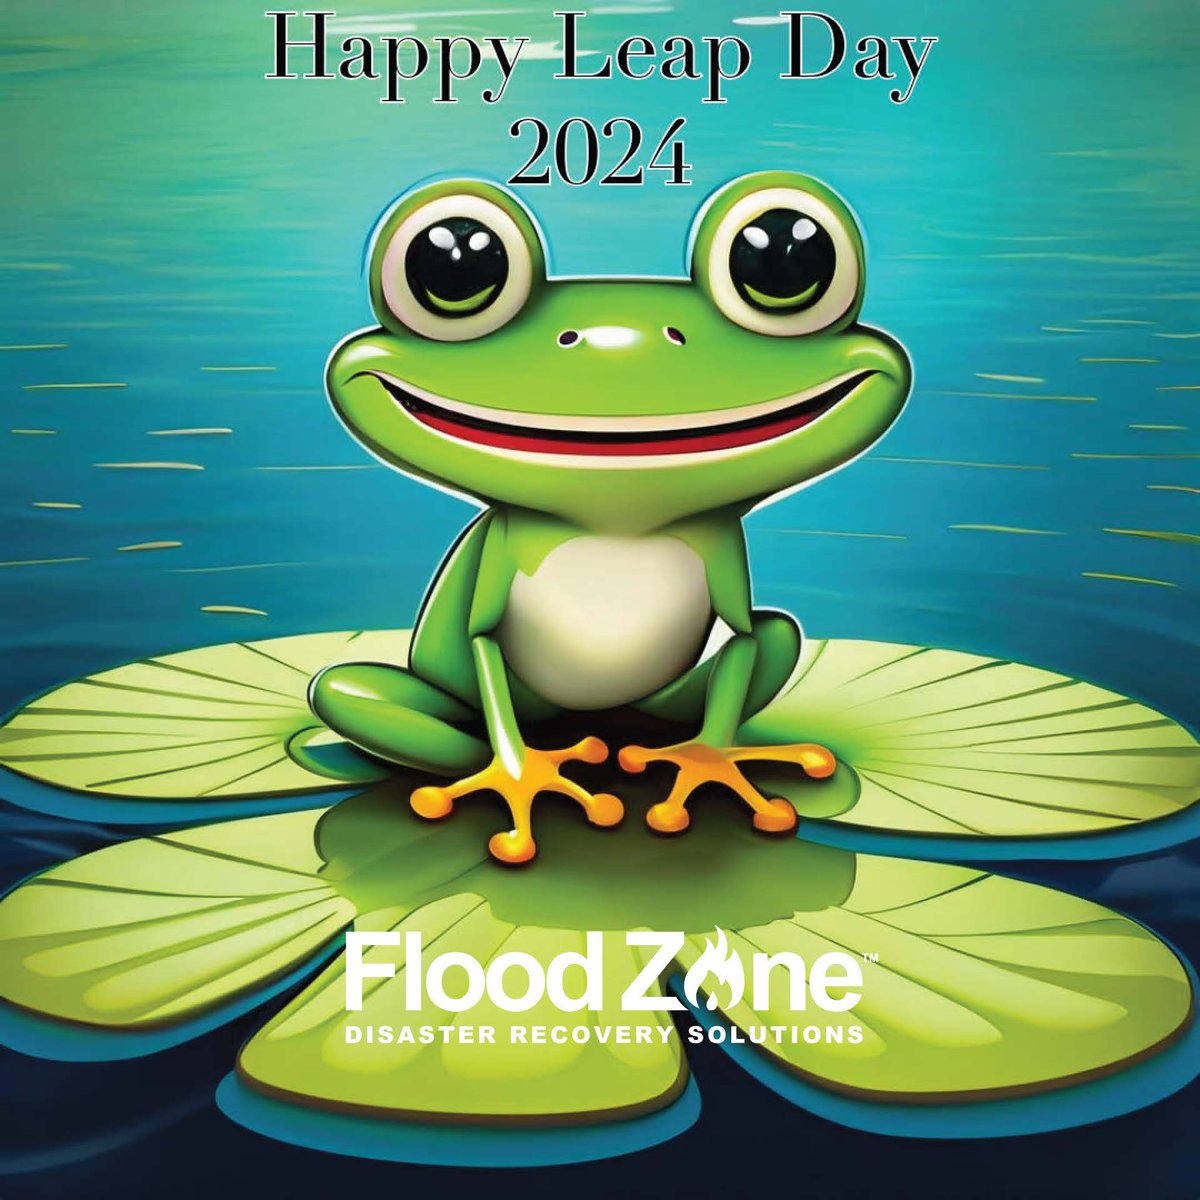 🌟 Happy Leap Day! 🌟 Protect your business from water damage with Flood Zone Disaster Recovery Solutions. 💧Swift response, expert technicians, and state-of-the-art equipment. Call 1-844-863-3279 now! 📲 

#LeapDay #WaterDamageHeroes #LeapIntoAction #FloodZoneCares